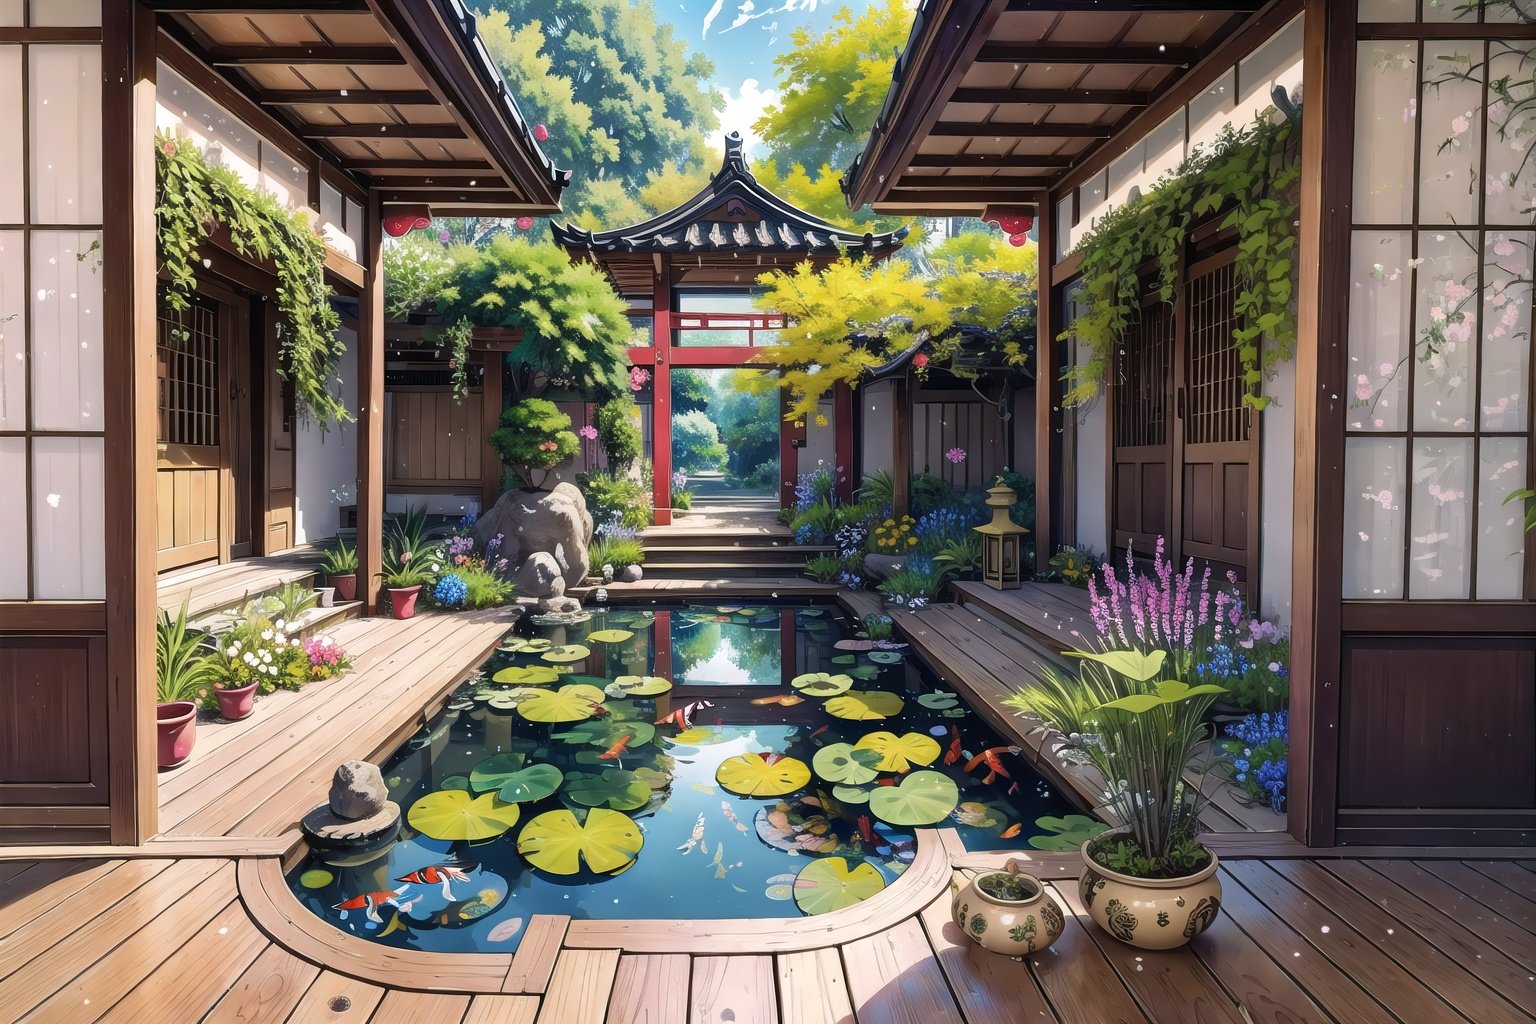 Immerse yourself in a (masterpiece,  best quality,  CGI:1.2) artwork that brings to life a fantastic vortex of colors in a vibrant magical realm,  top quality,  8k,  perfect lighting and composition,  bloom,  (gradients),  rainbow,  indoors,  east asian architecture,  reflective floor,  wooden floor,  human furniture,  (intricate details:1.2),  (glowing flora and fauna:1.2),  creating a whimsical and enchanting atmosphere,  (no humans:1.3),  hatching (texture),  courtyard in background,  (blurry foreground:1.1),  deep depth of field,  floating particles,  koi pond,  lilypad,  overgrown,  moon door,  rug,  embroidery,  halation,  shadow, <lora:EMS-36517-EMS:-0.500000>